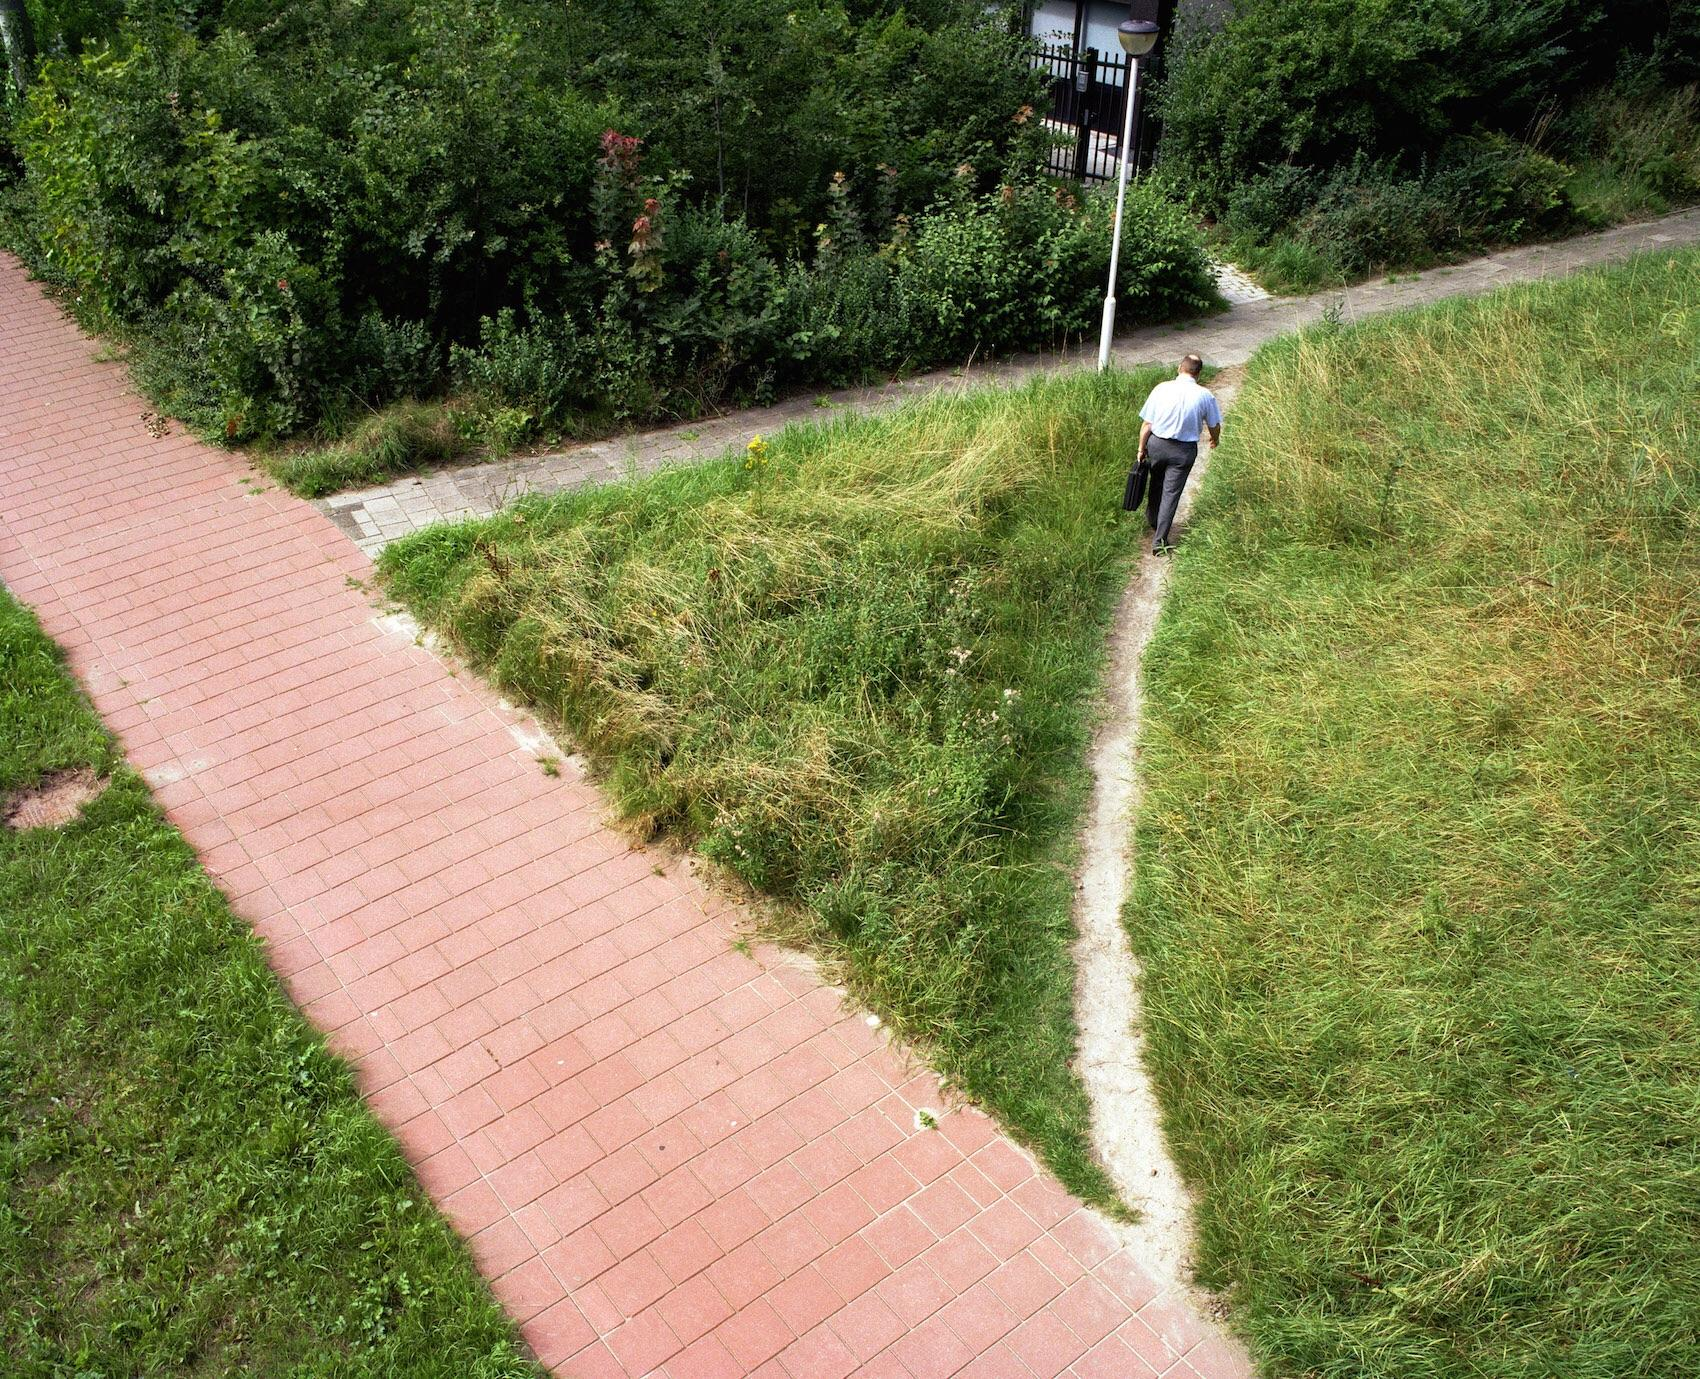 A desire path carved out by its users. Photo by Jan-Dirk van der Burg.